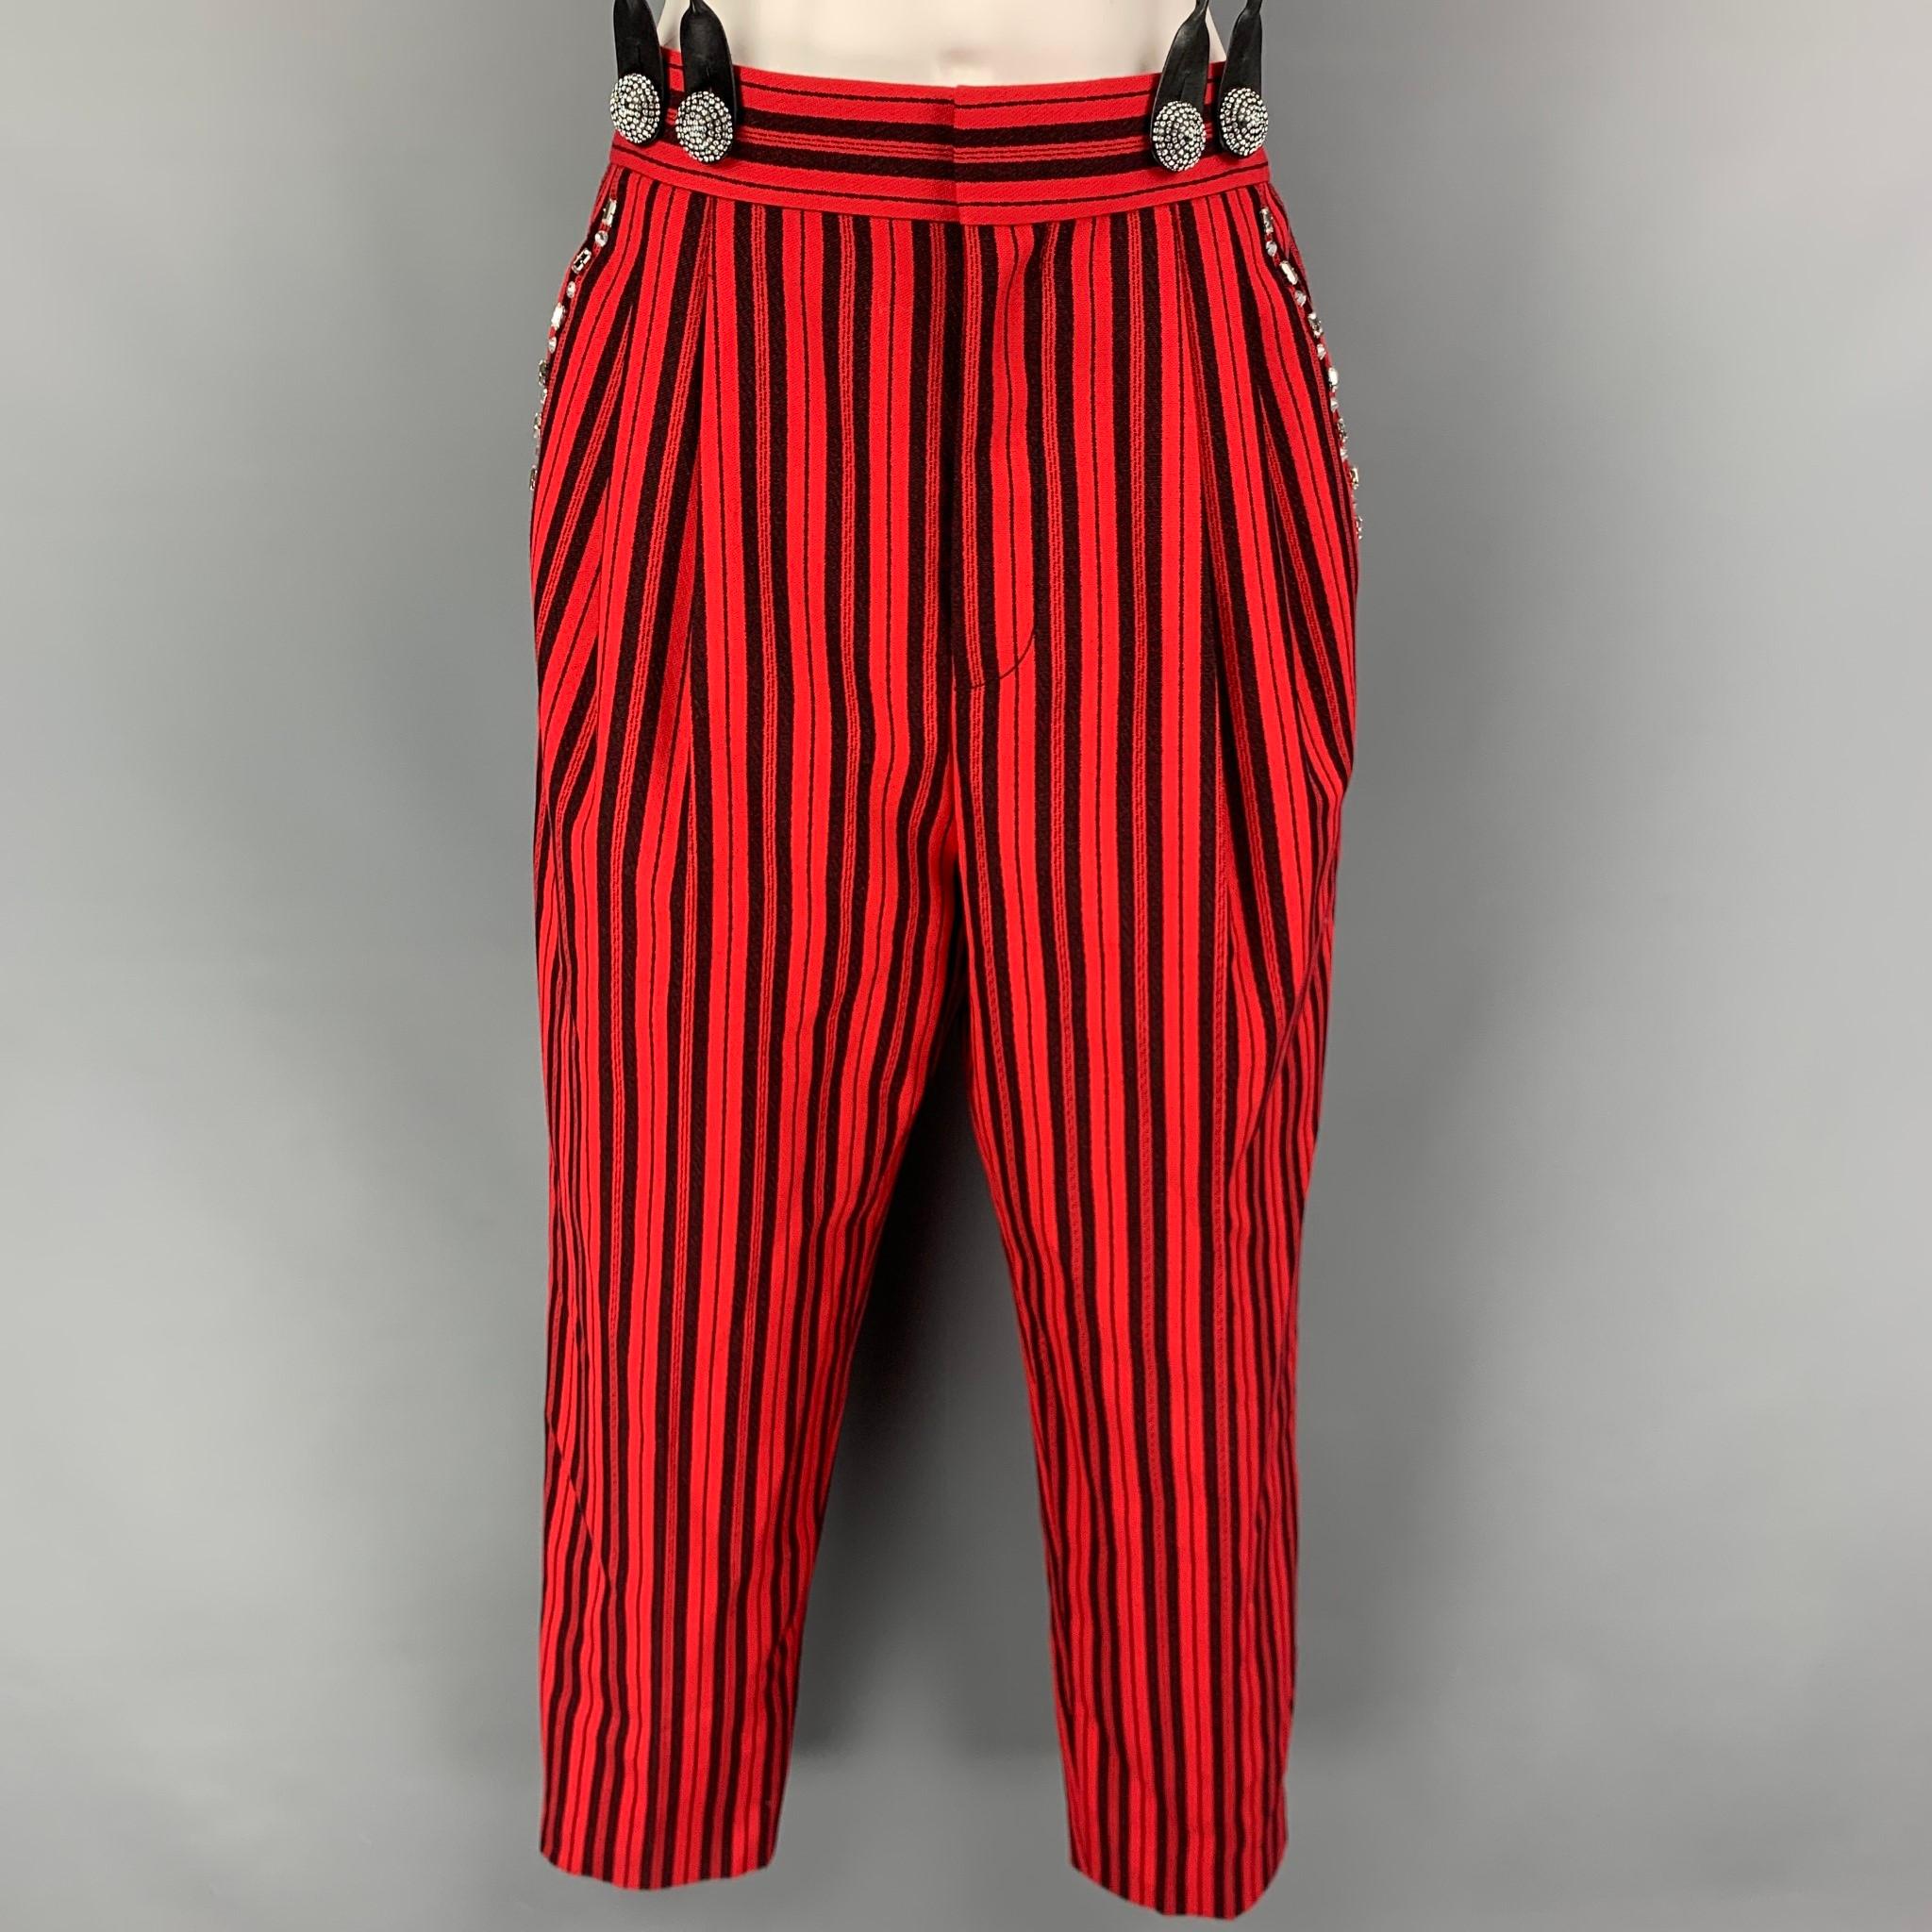 MARC JACOBS dress pants comes in a red & black stripe wool featuring a pleated style, crystal embellishments, suspenders, front tab, and a zip fly closure. Made in USA. 

Excellent Pre-Owned Condition.
Marked: 6

Measurements:

Waist: 30 in.
Rise: